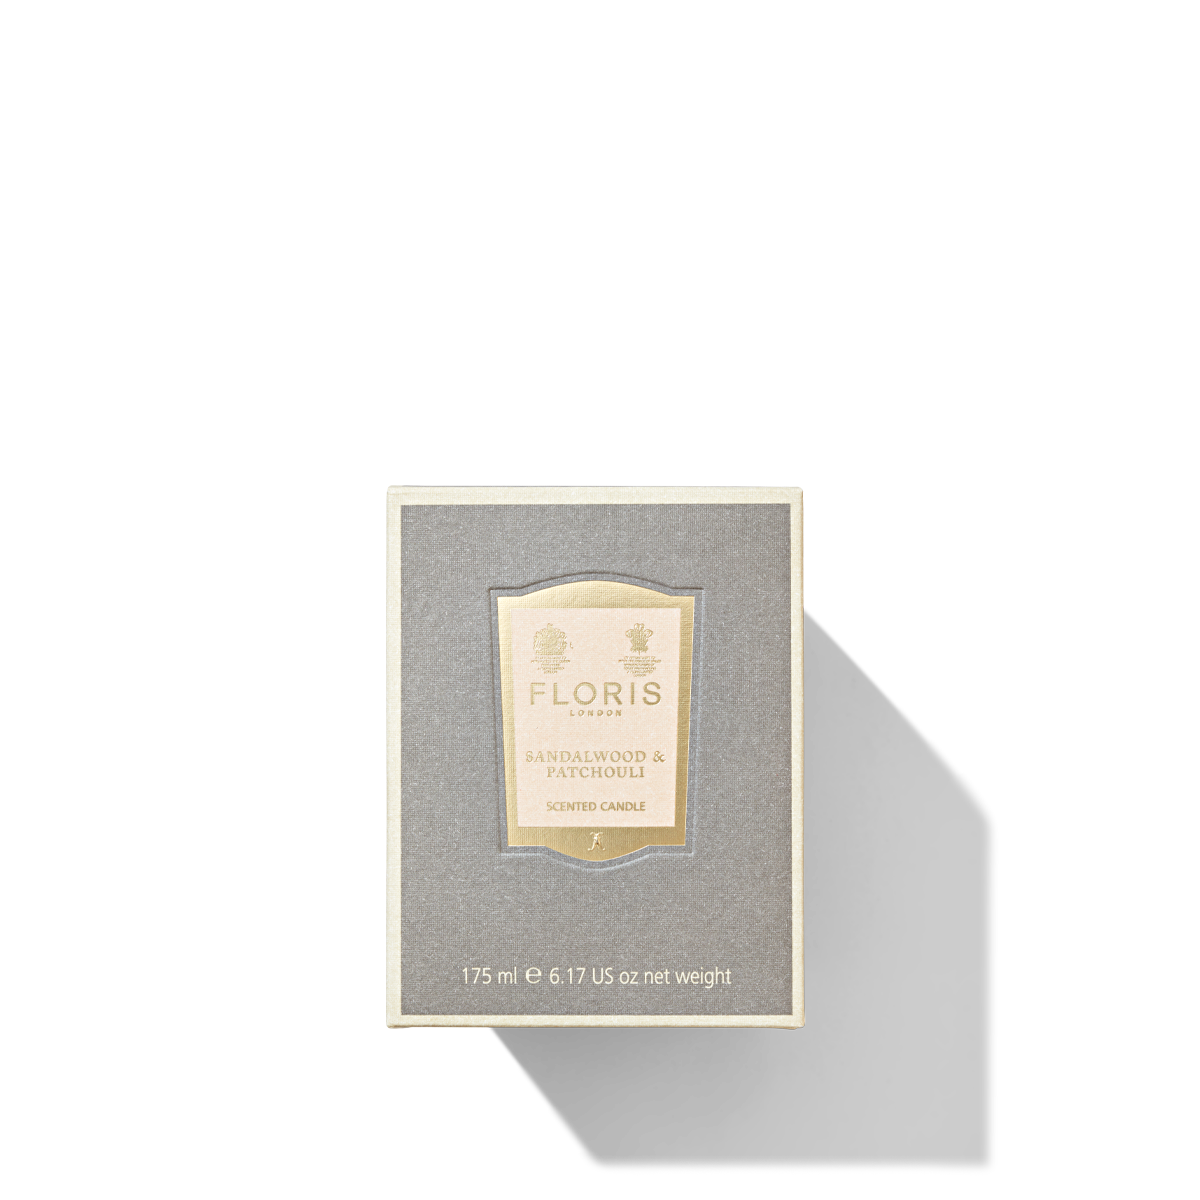 Grey mushroom coloured bod with light pink and gold label reading 'Floris london sandalwood and patchouli scented candle'.